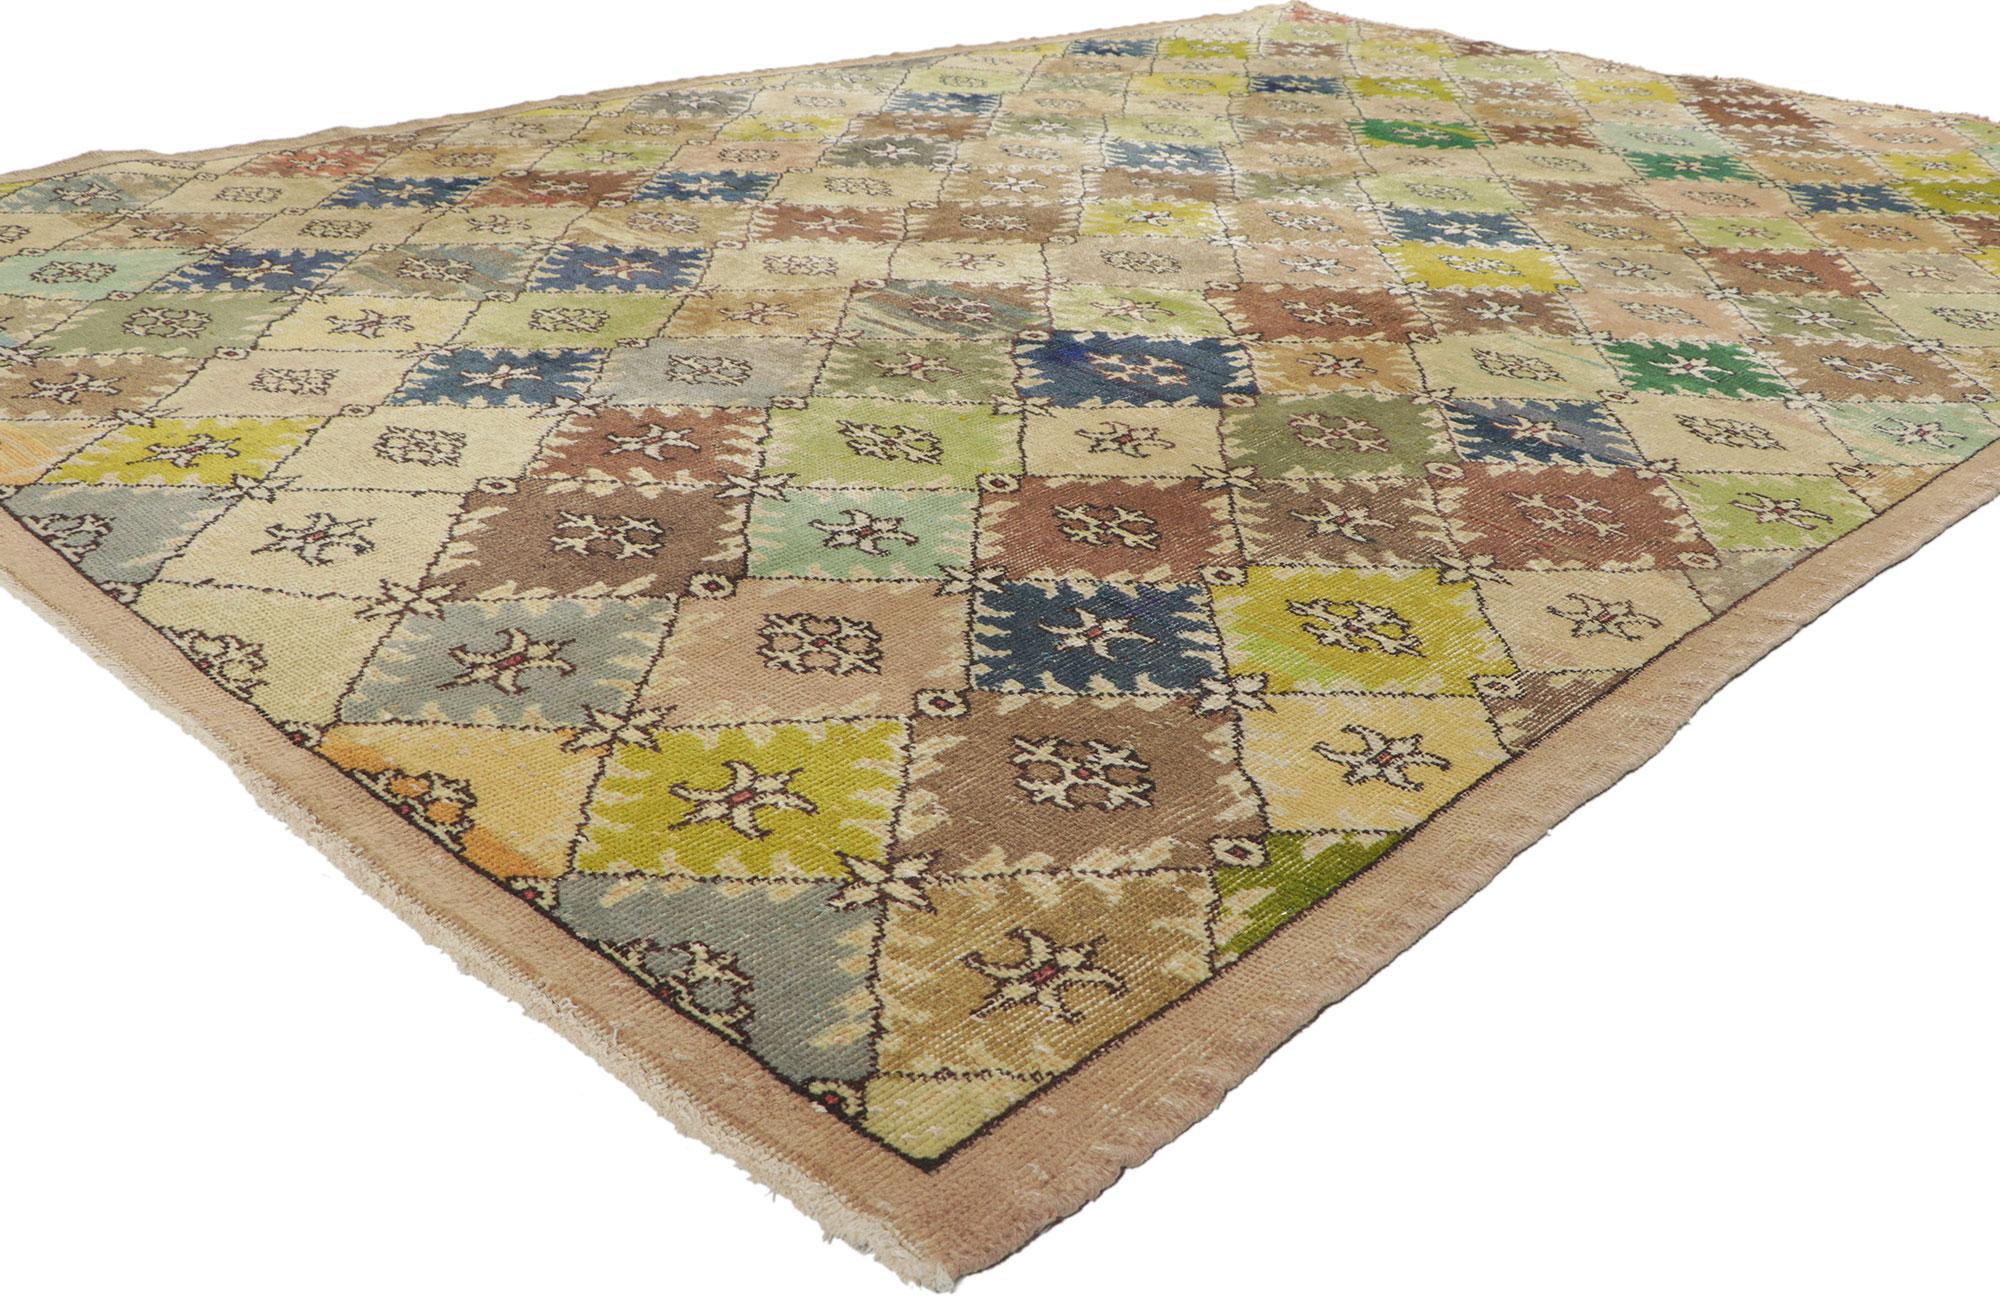 52138 Vintage Turkish Sivas Rug, 06'09 x 10'00.
Warm and inviting with its perfectly worn-in charm, this distressed vintage Turkish Sivas area rug beautifully embodies a Modern Industrial style. The weathered field is covered in an all-over